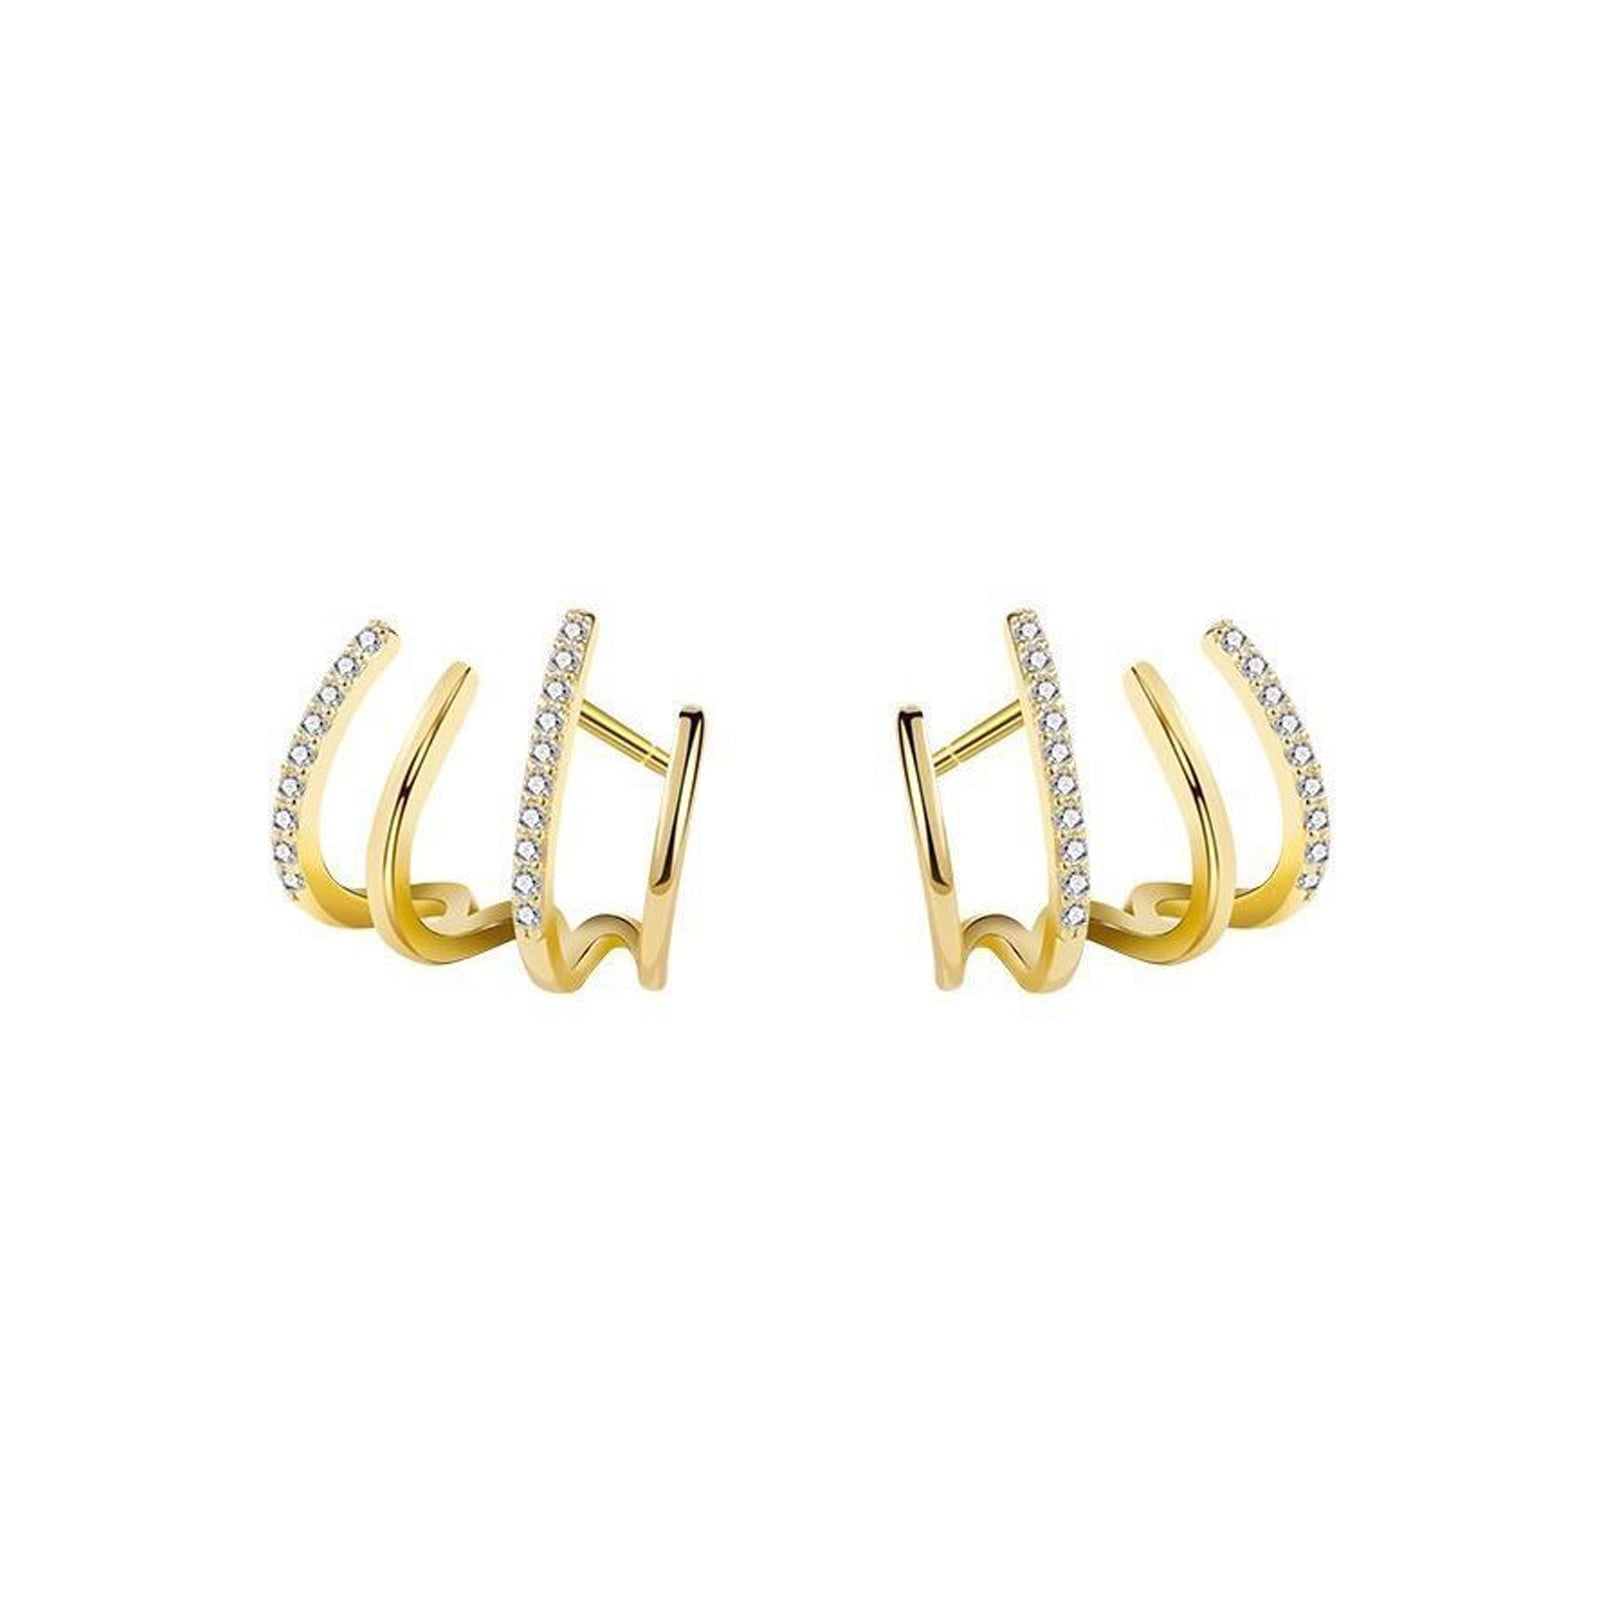  2 Pairs14k Gold Plated Screw Earring Backs 925